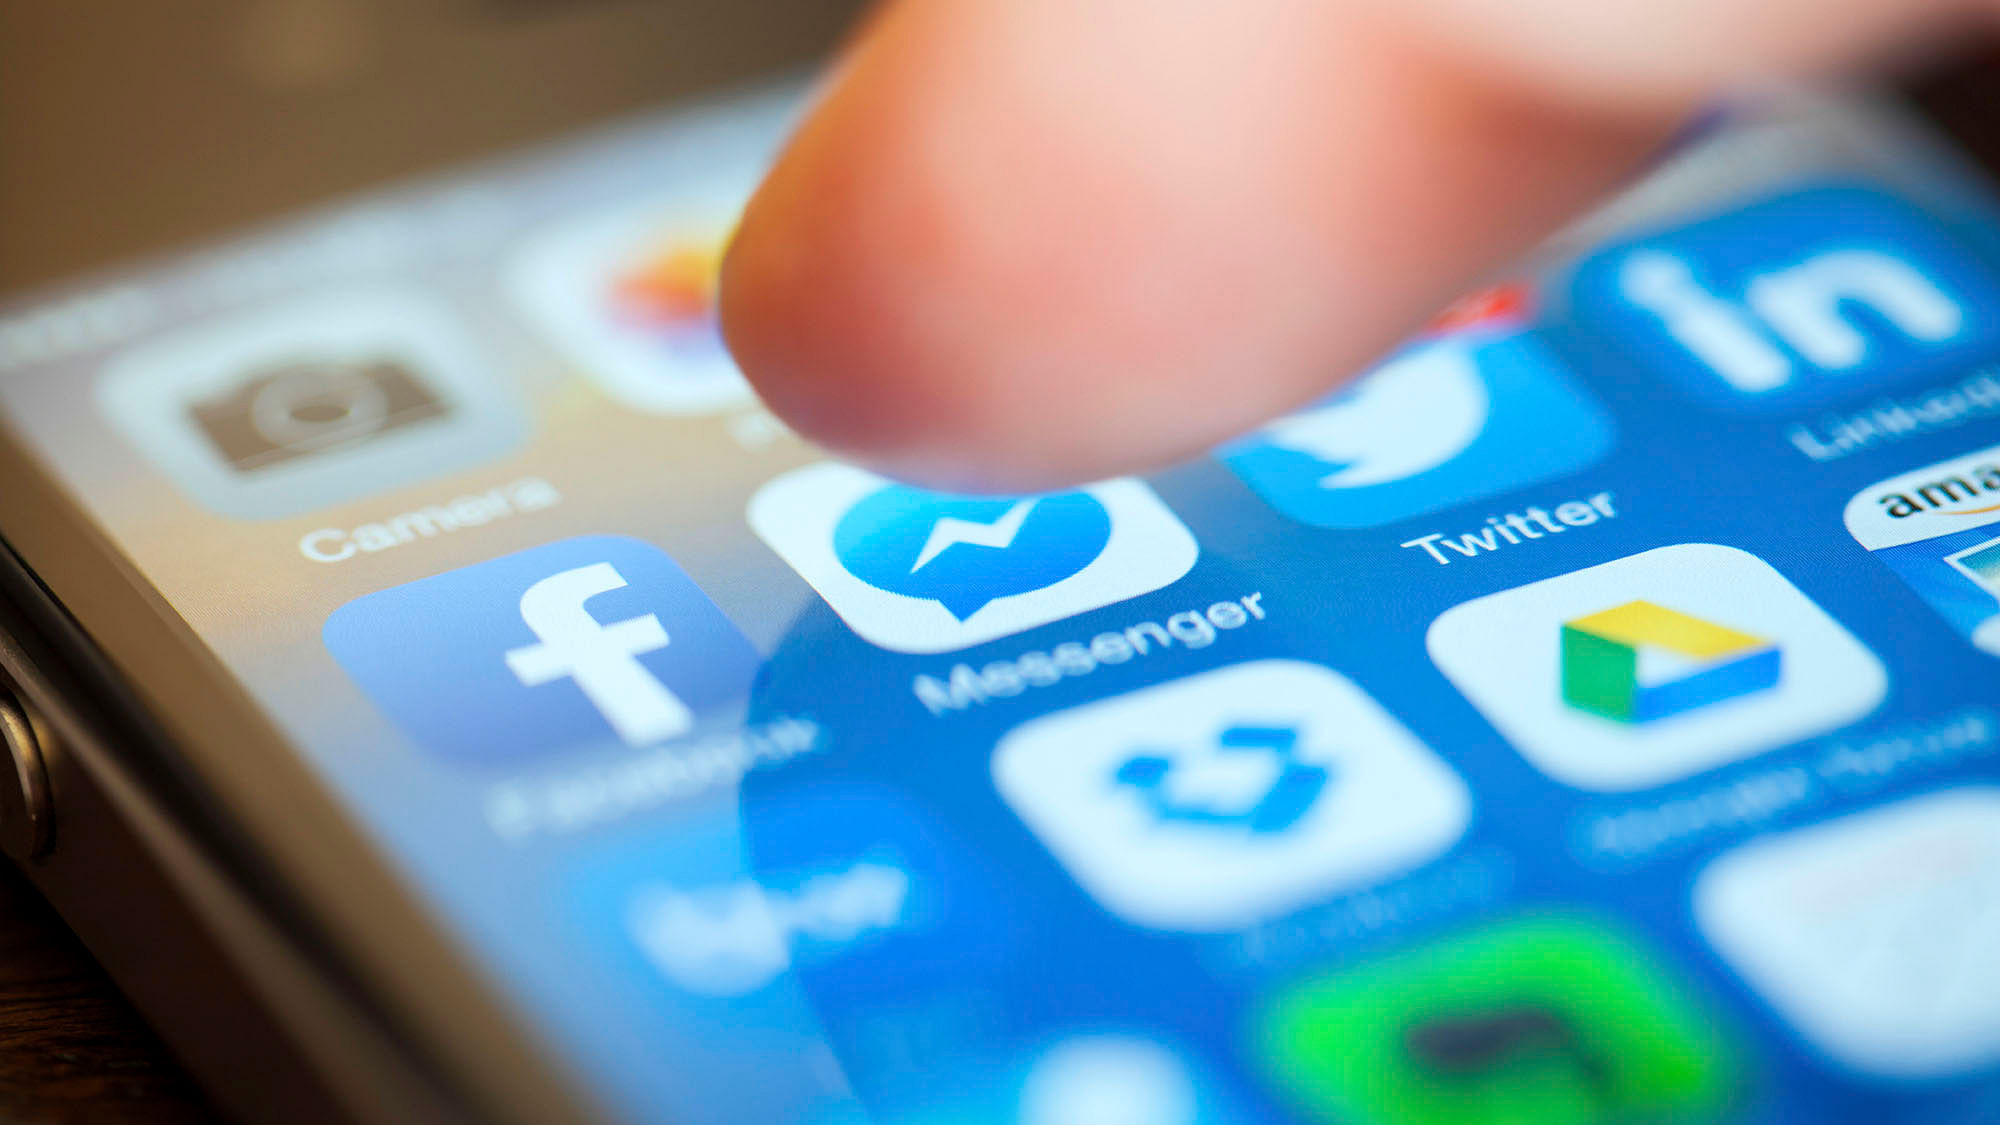 Facebook Messenger will soon be only available as an app. (Photo: iStockphoto)